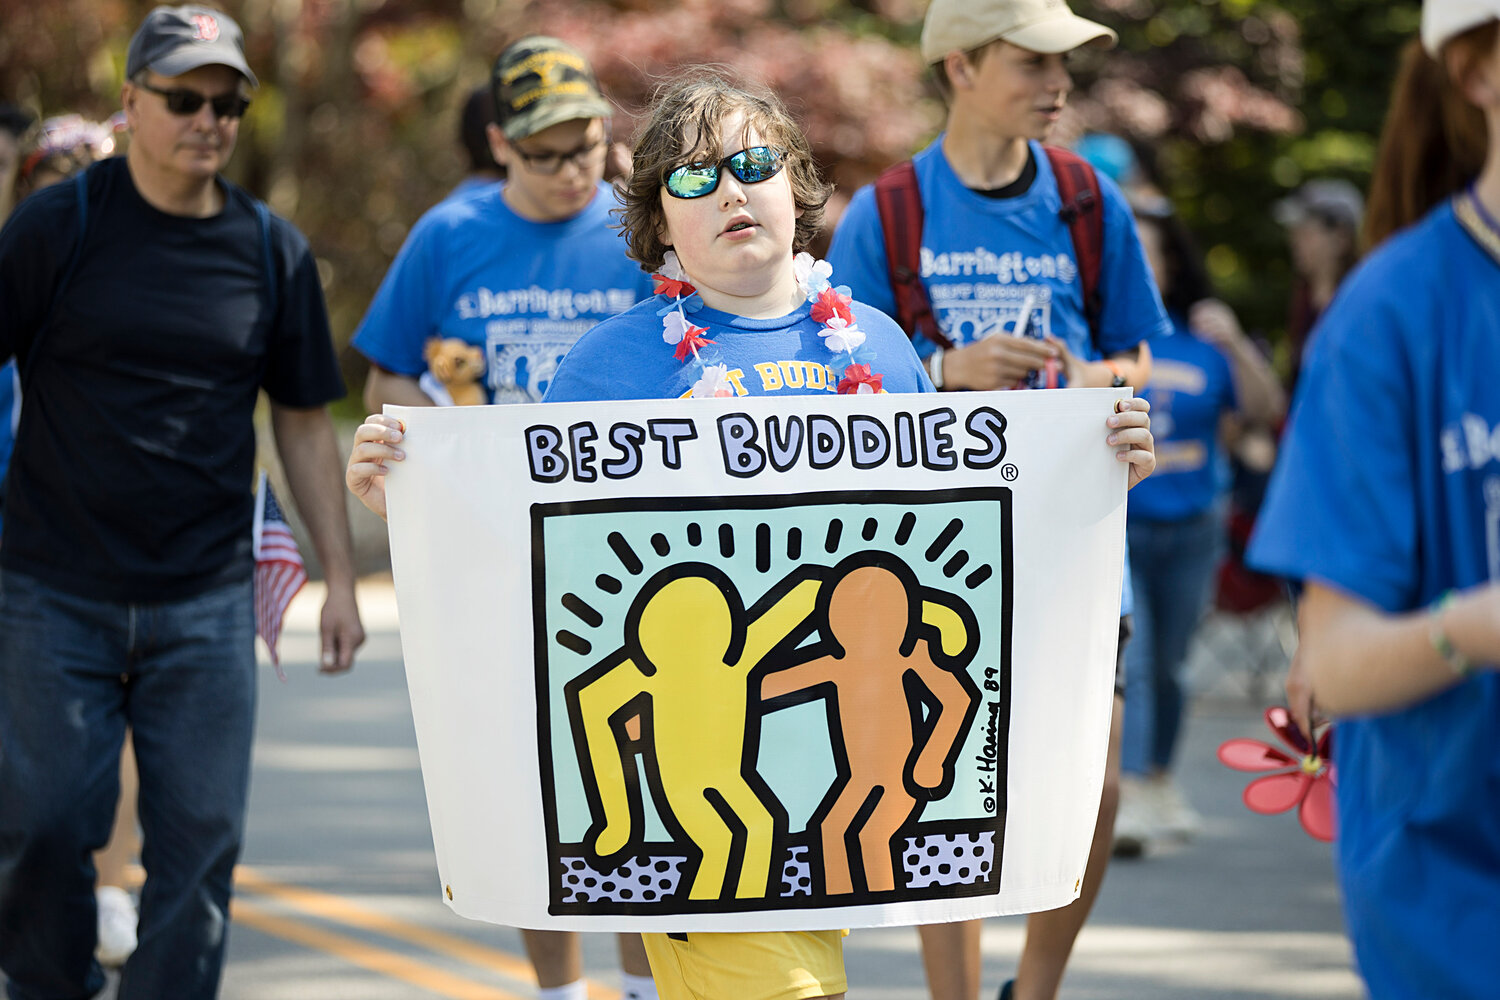 Barrington's "Best Buddies" smile as they walk up Upland Way in Barrington's Memorial Day parade, Monday.